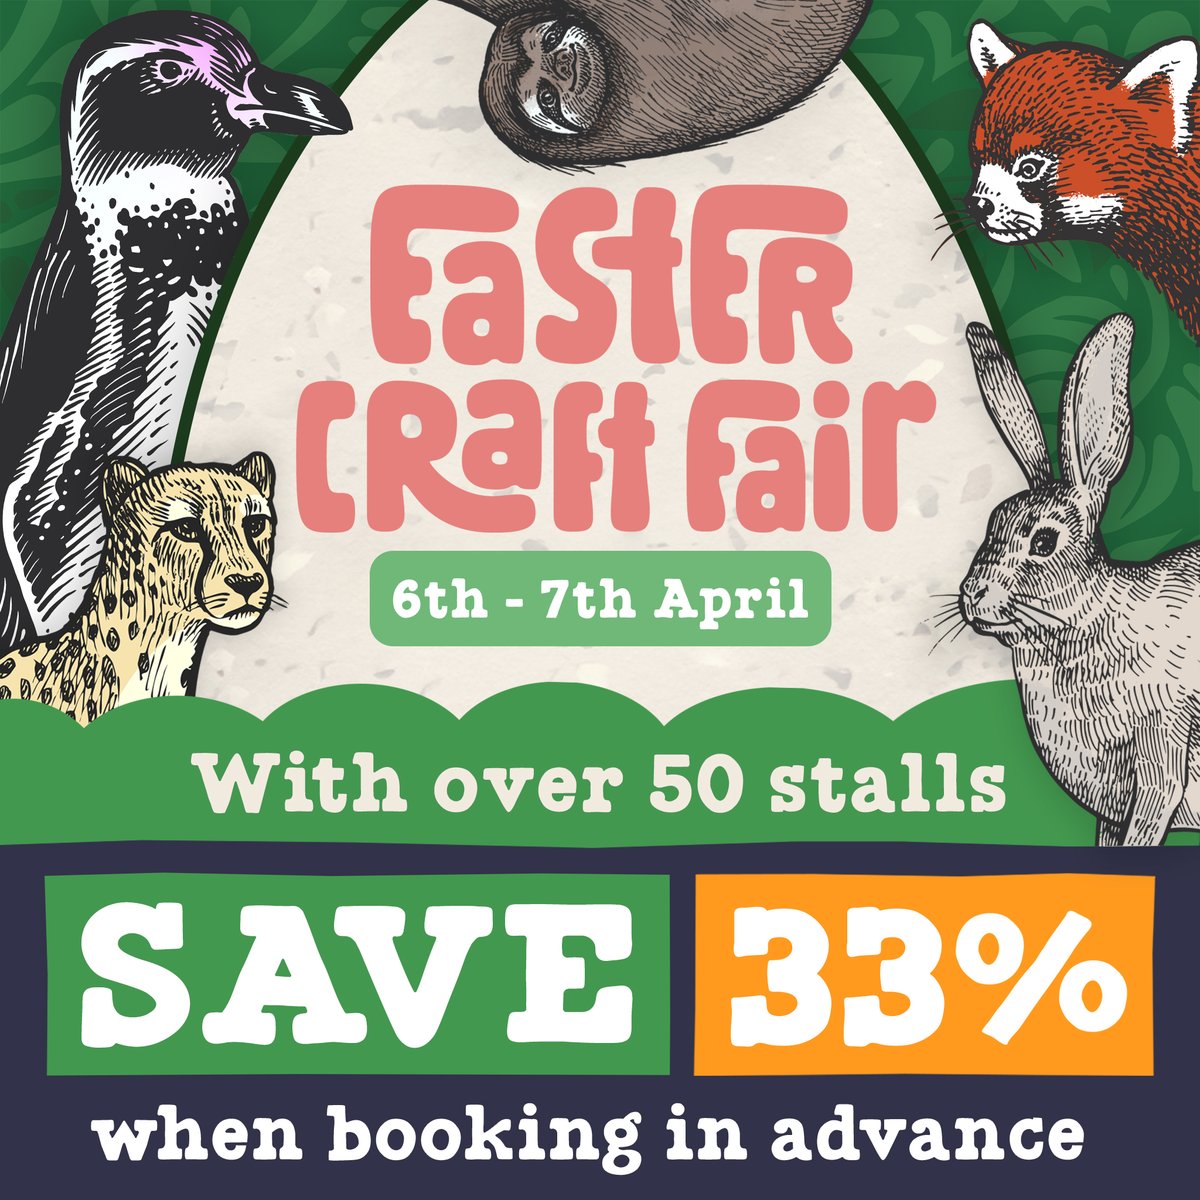 This weekend join us for our Craft Fair 🥚🐣🌸 We've got over 50 stall holders joining us - from foodie stands to jewellery, wax melts, bags, homeware, plus much more. Prebook your tickets and you'll receive a 33% discount: zsea.org/banham/tickets…